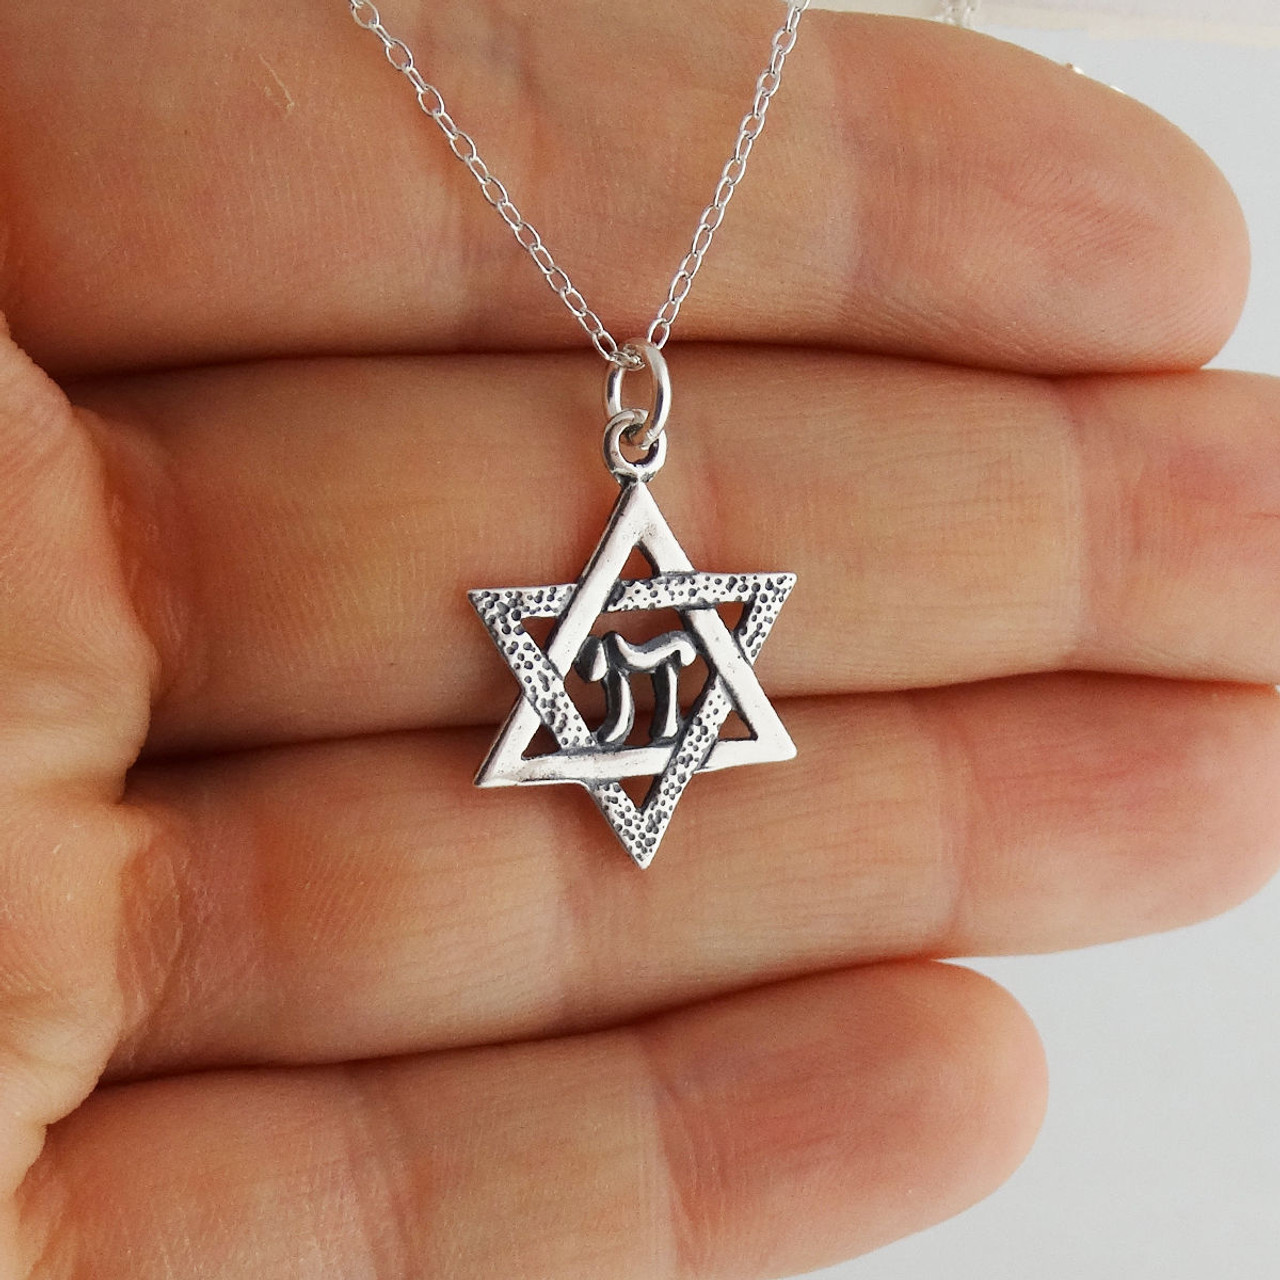 Star of David with Chai Necklace - 925 Sterling Silver - FashionJunkie4Life